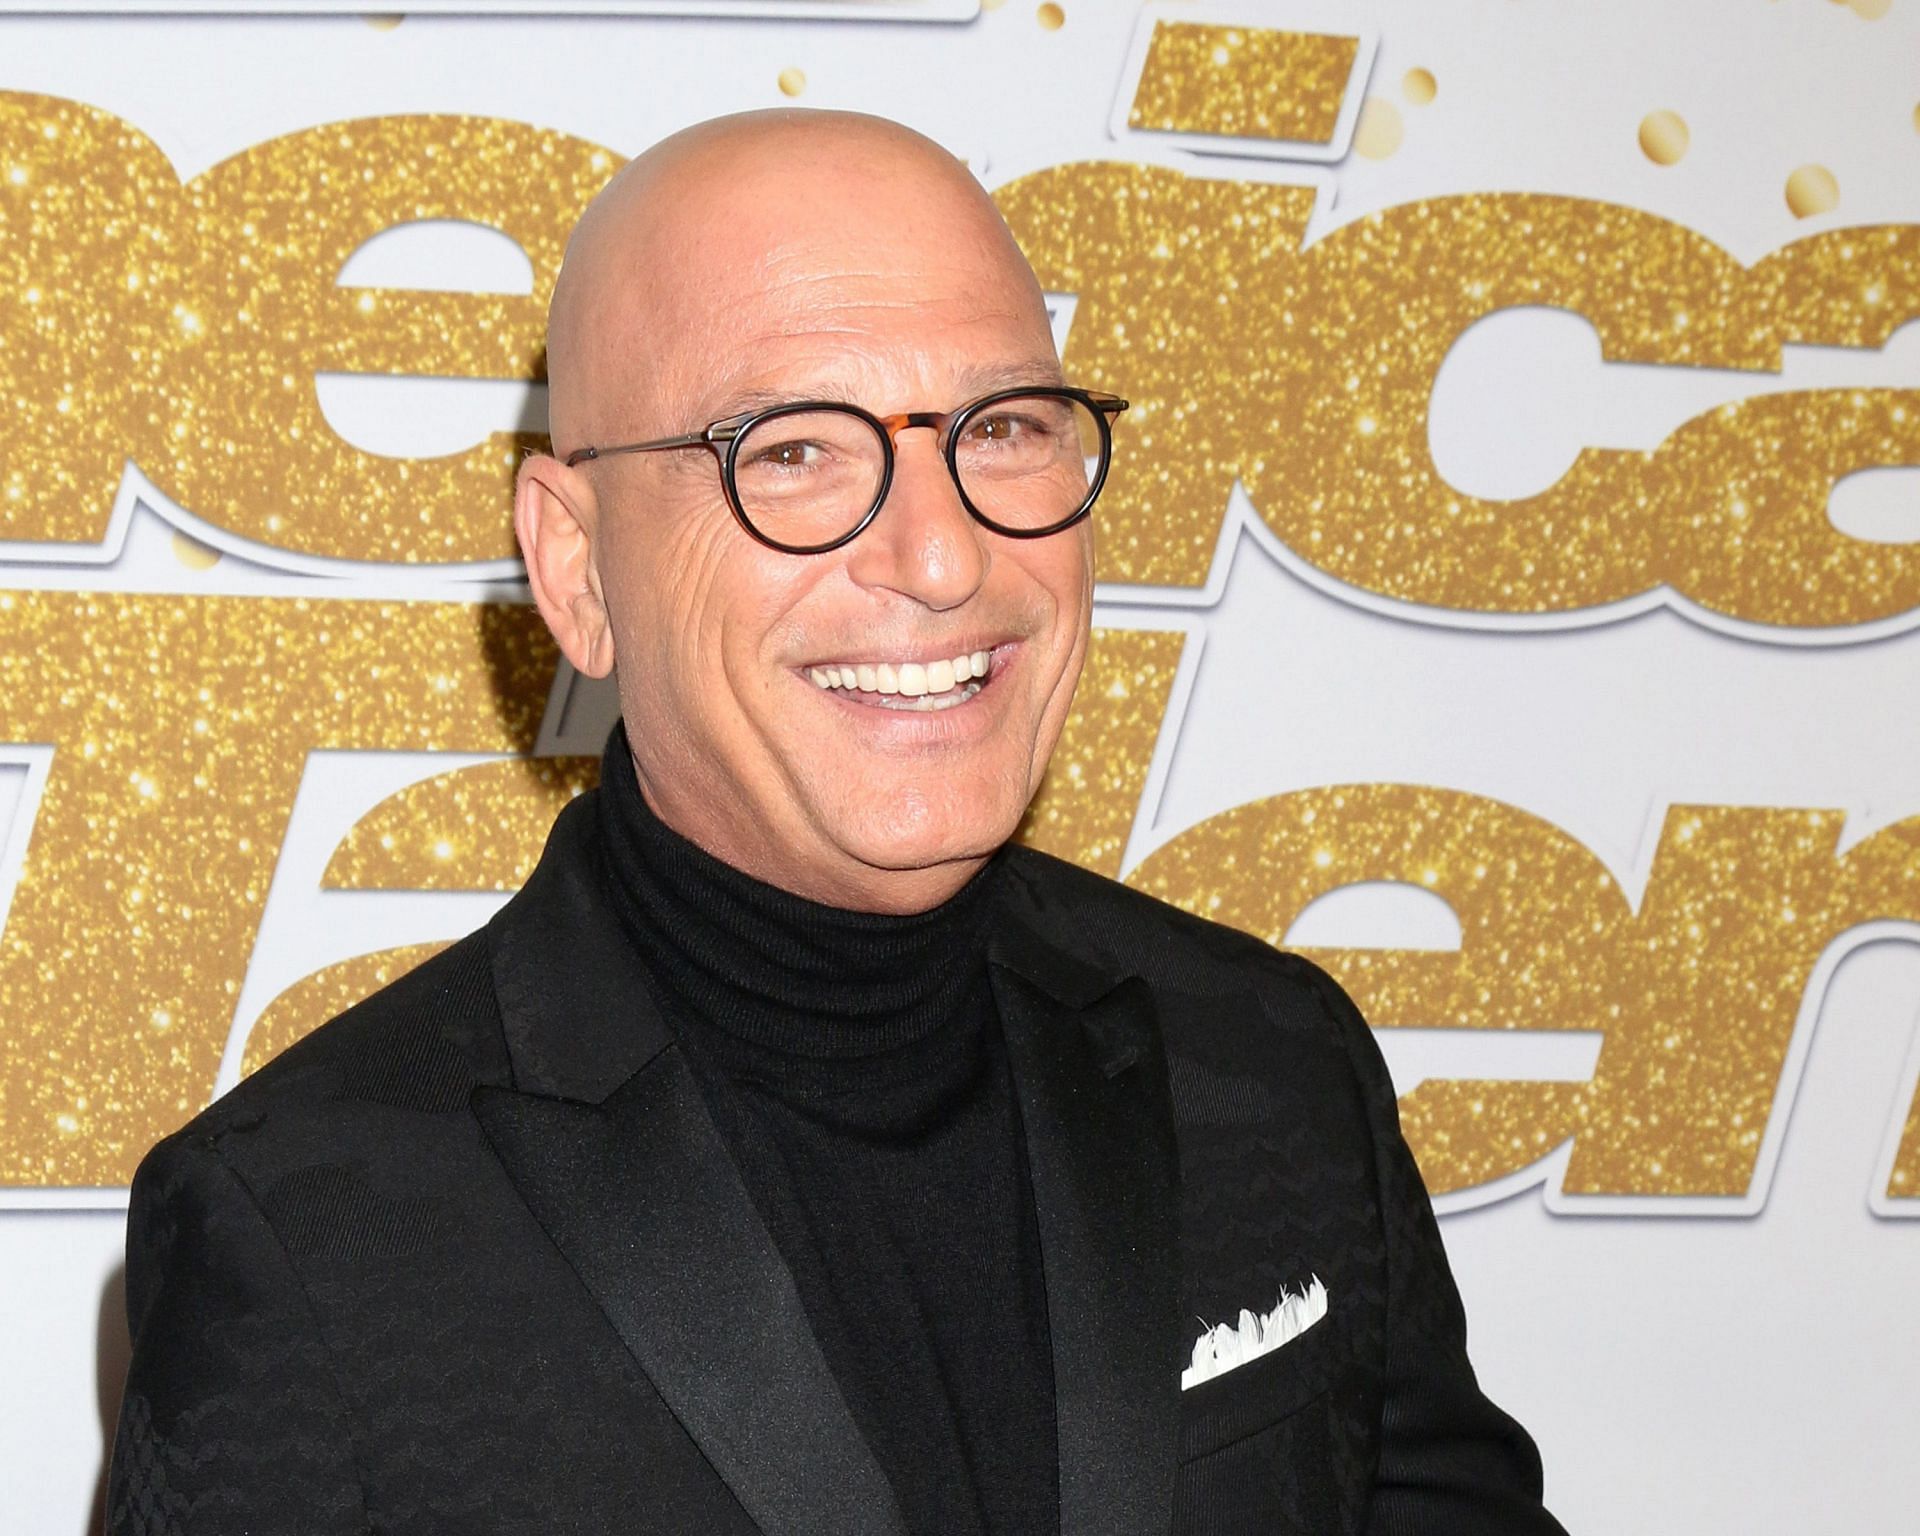 It took some time for Howie Mandel to come to terms with his diagnosis, but he is here now spreading awareness. (Image via Vecteezy/ Kathy Hucthins)